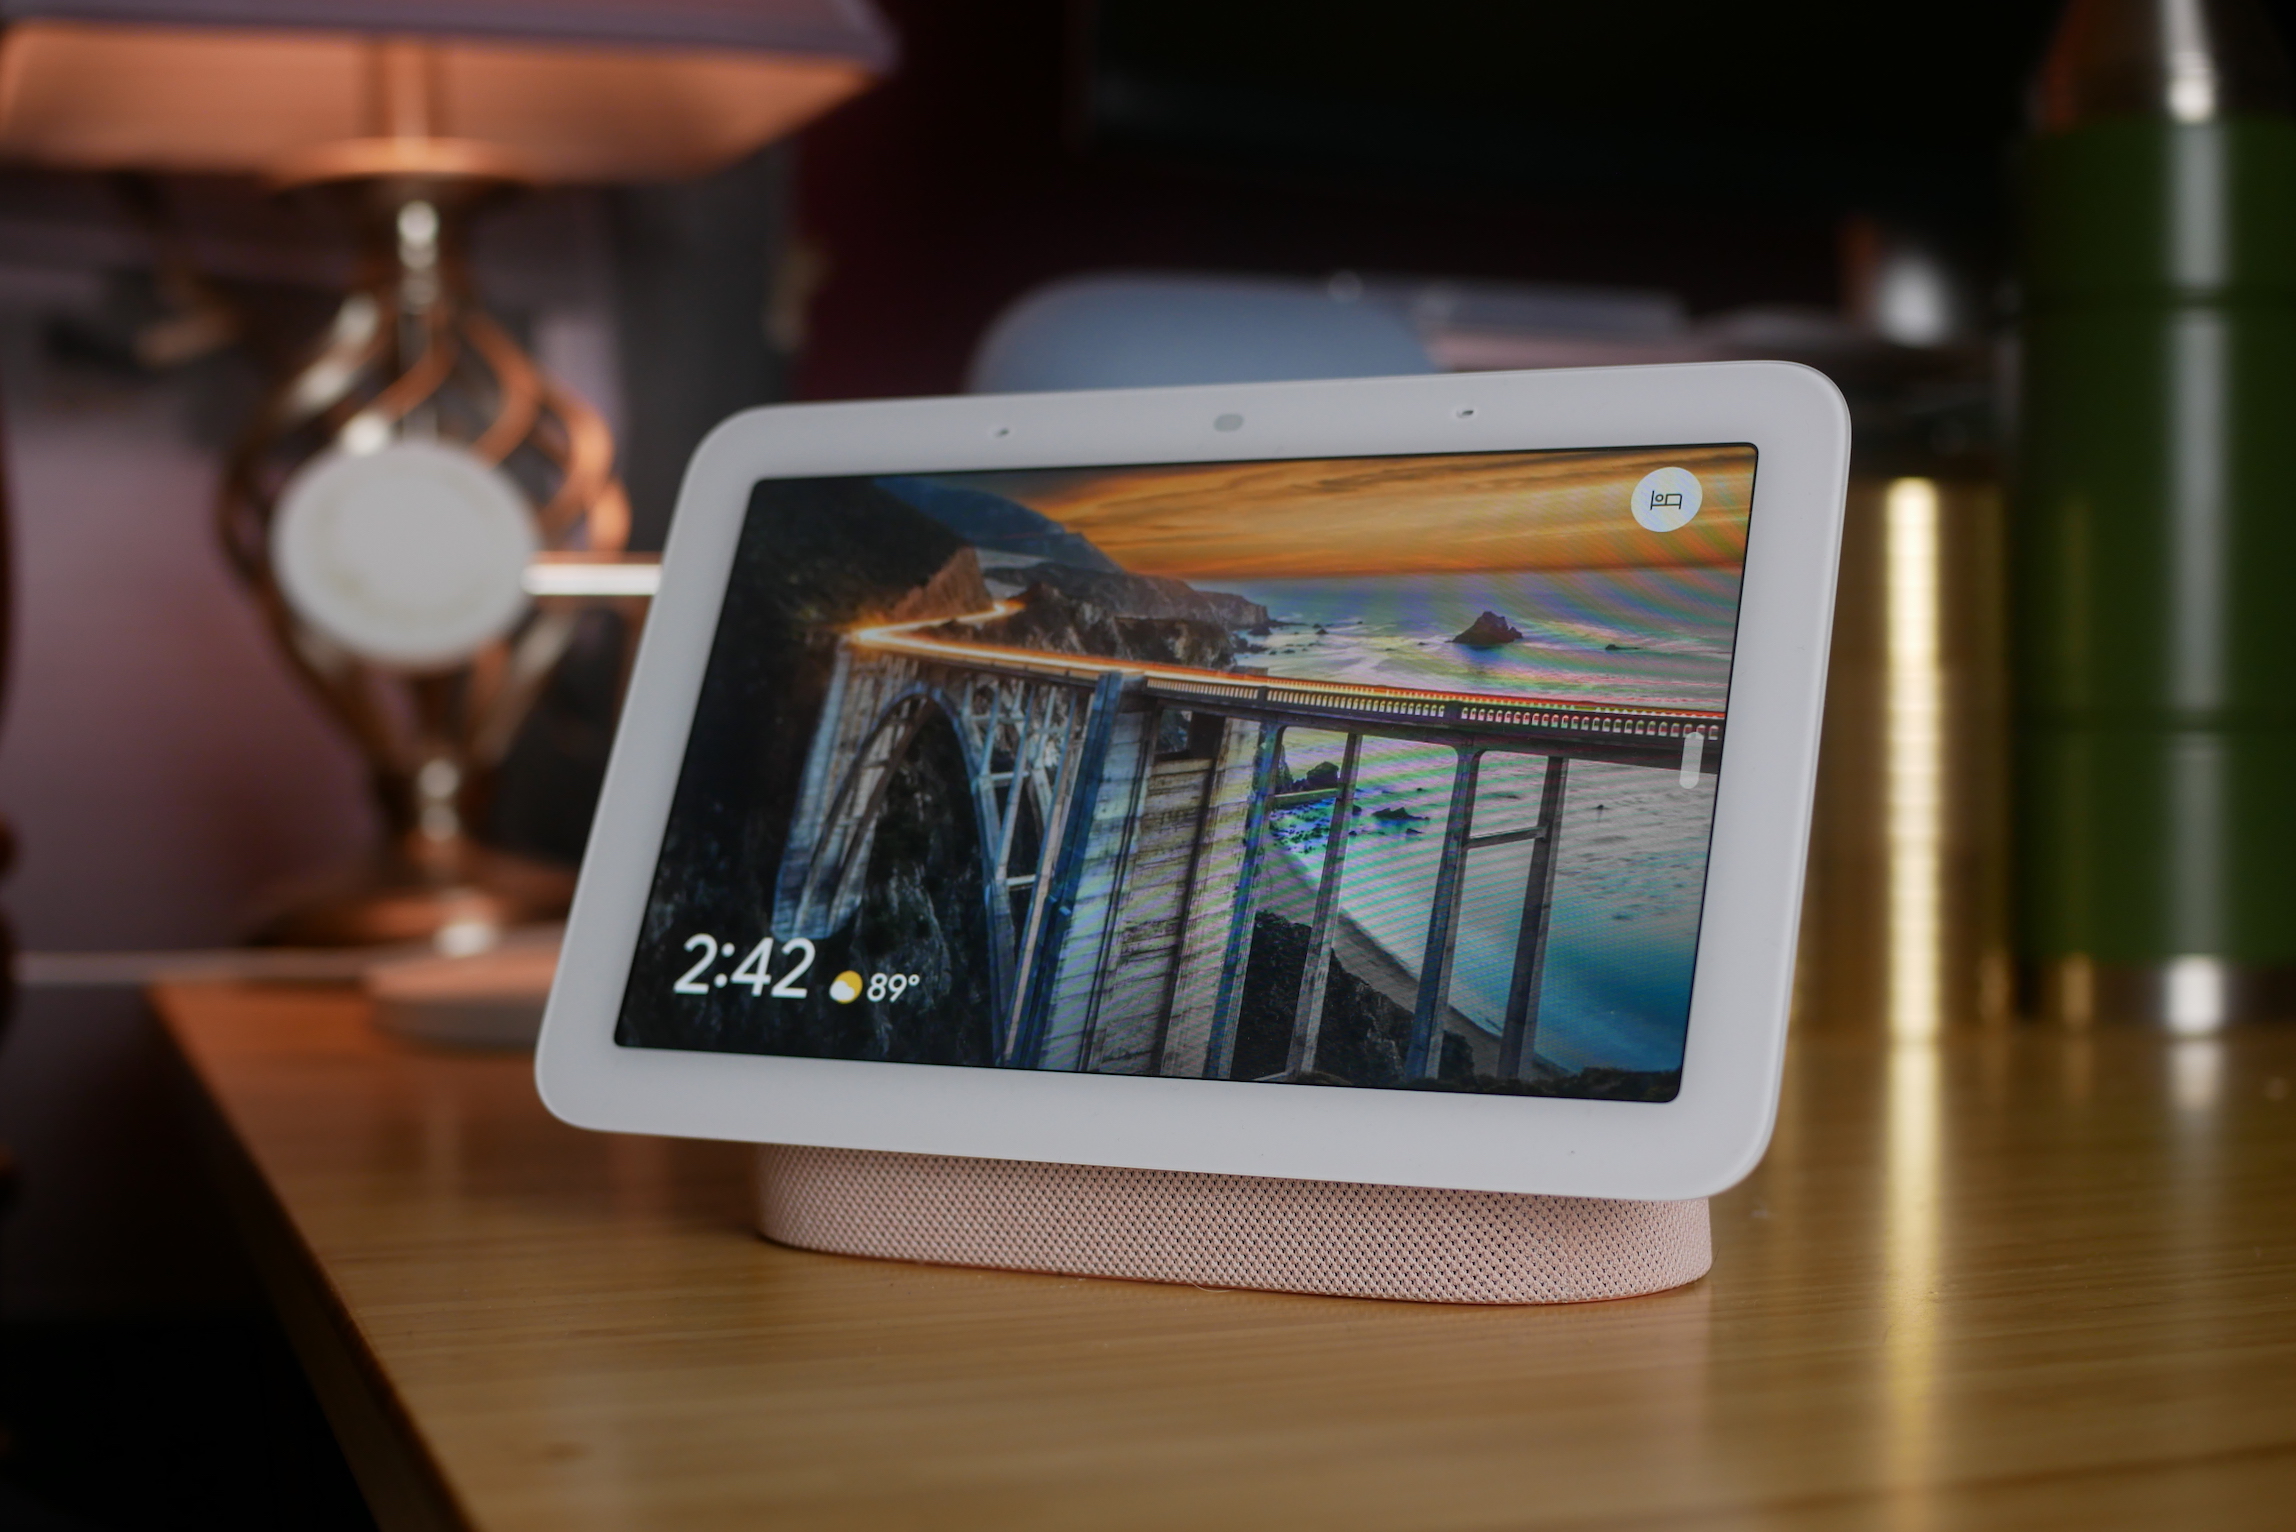 Google’s Nest Hub is the best bedside smart display—and sleep tracking